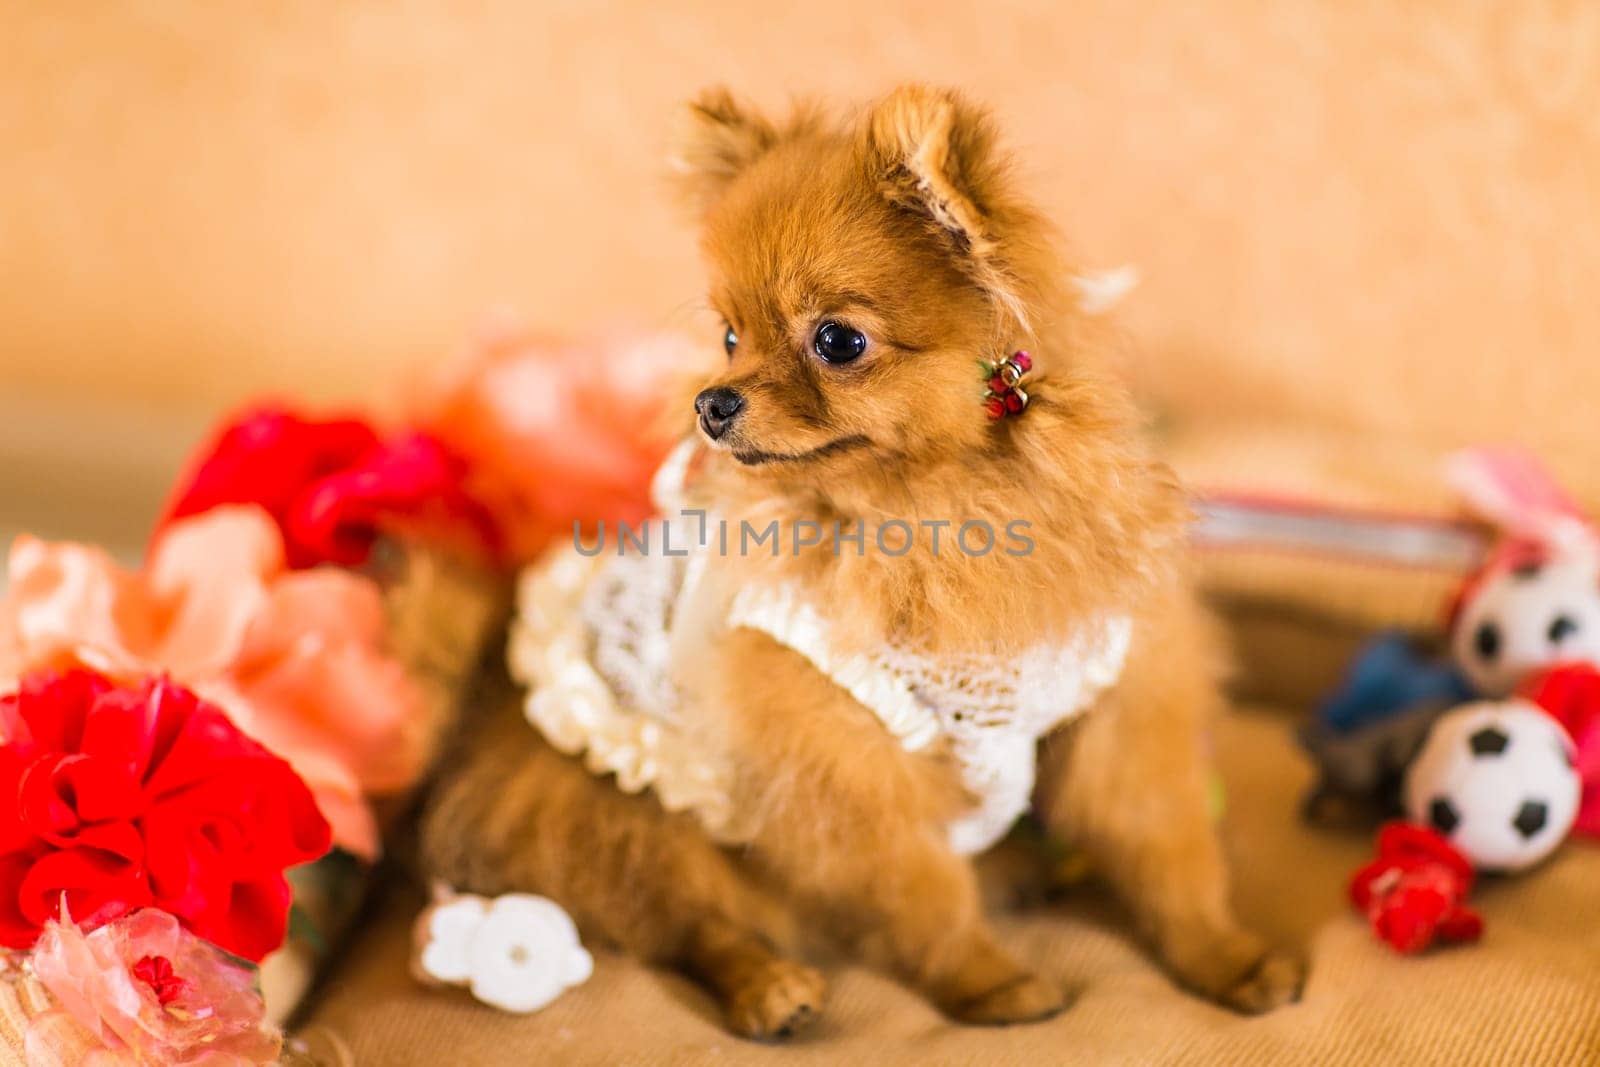 cute and funny puppy Pomeranian smiling on orange background.